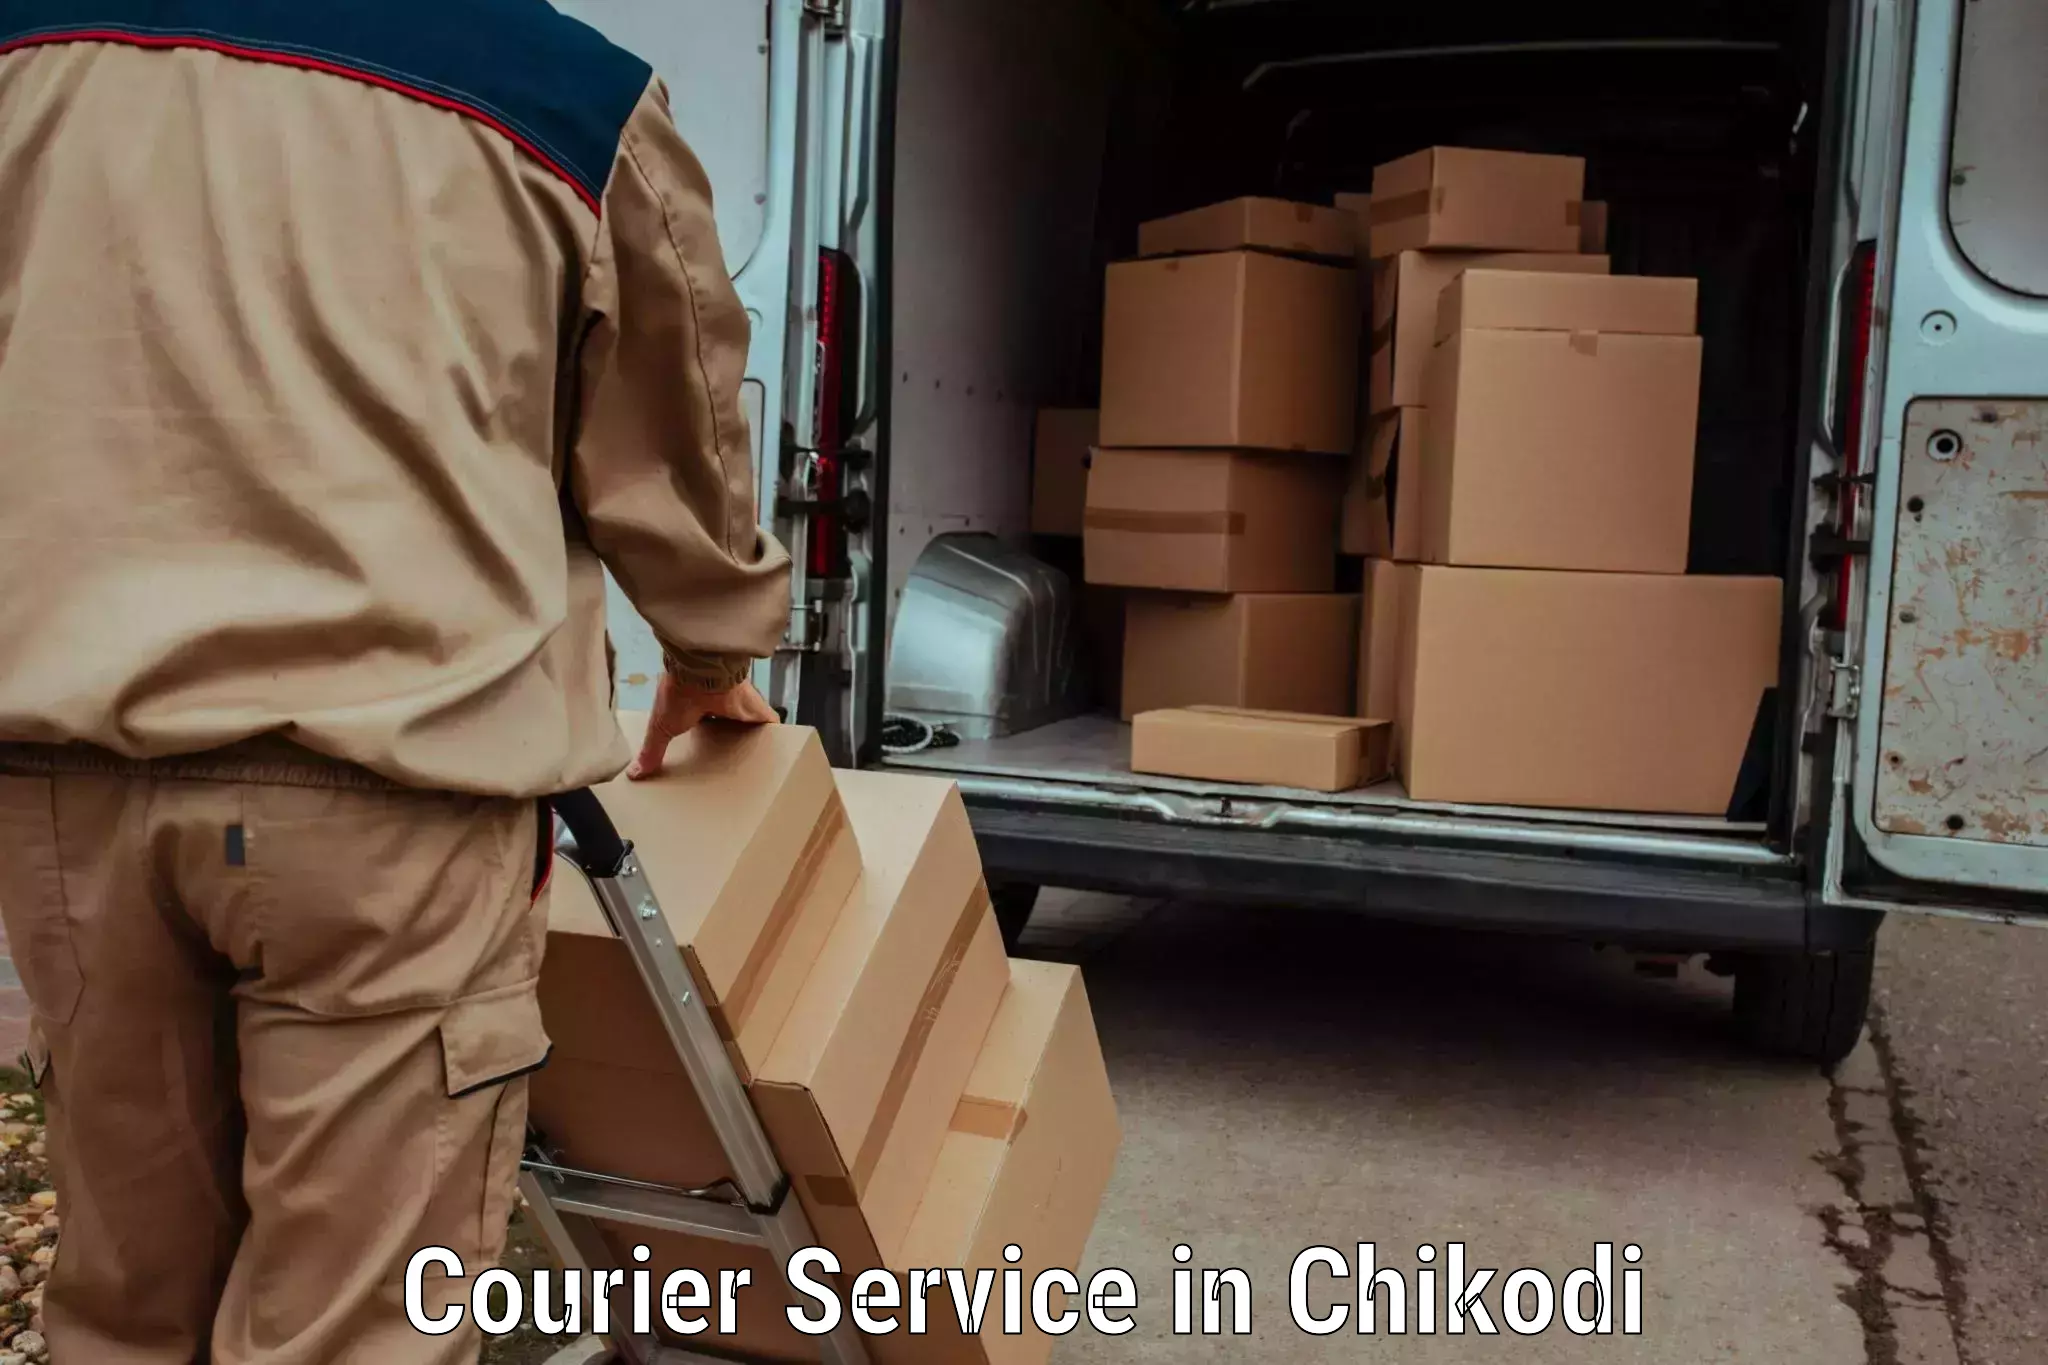 Next day courier in Chikodi